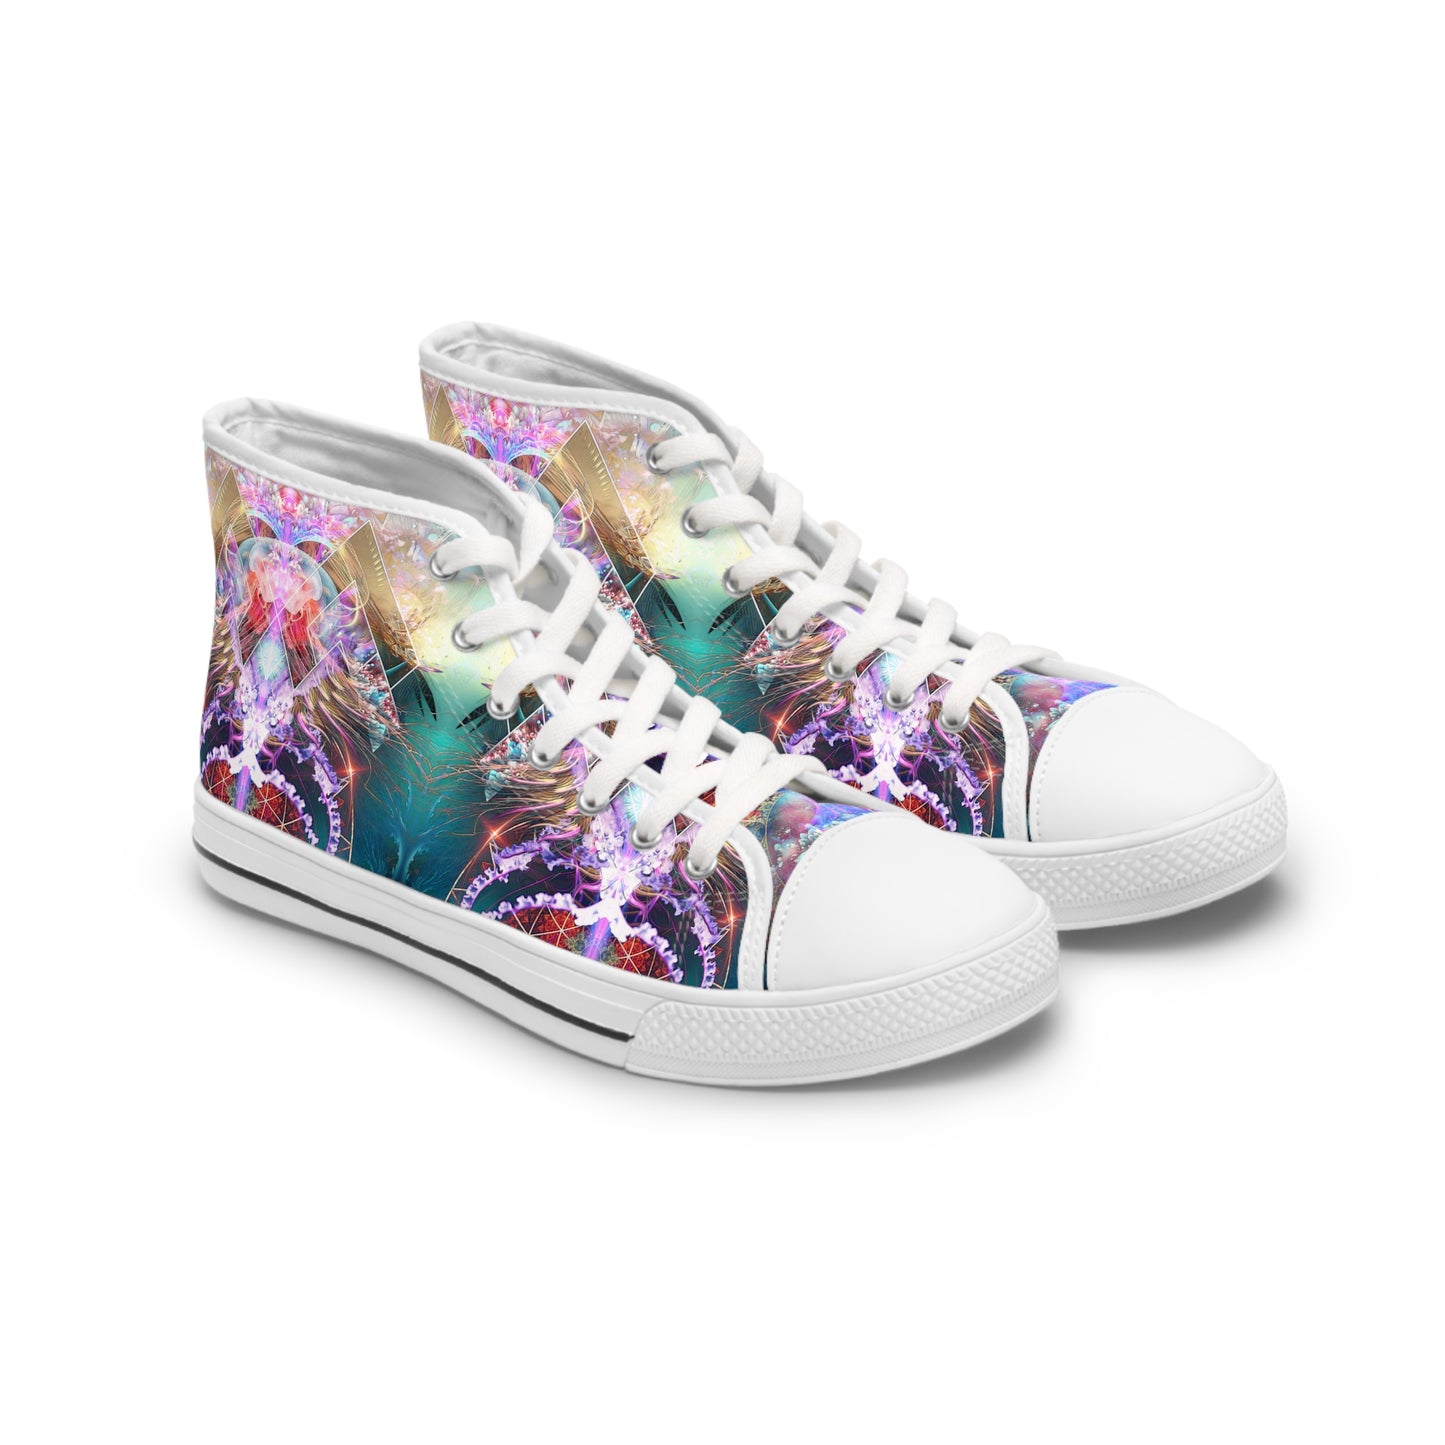 "Primordial Soup V2" WOMEN'S HIGHT TOP SNEAKERS